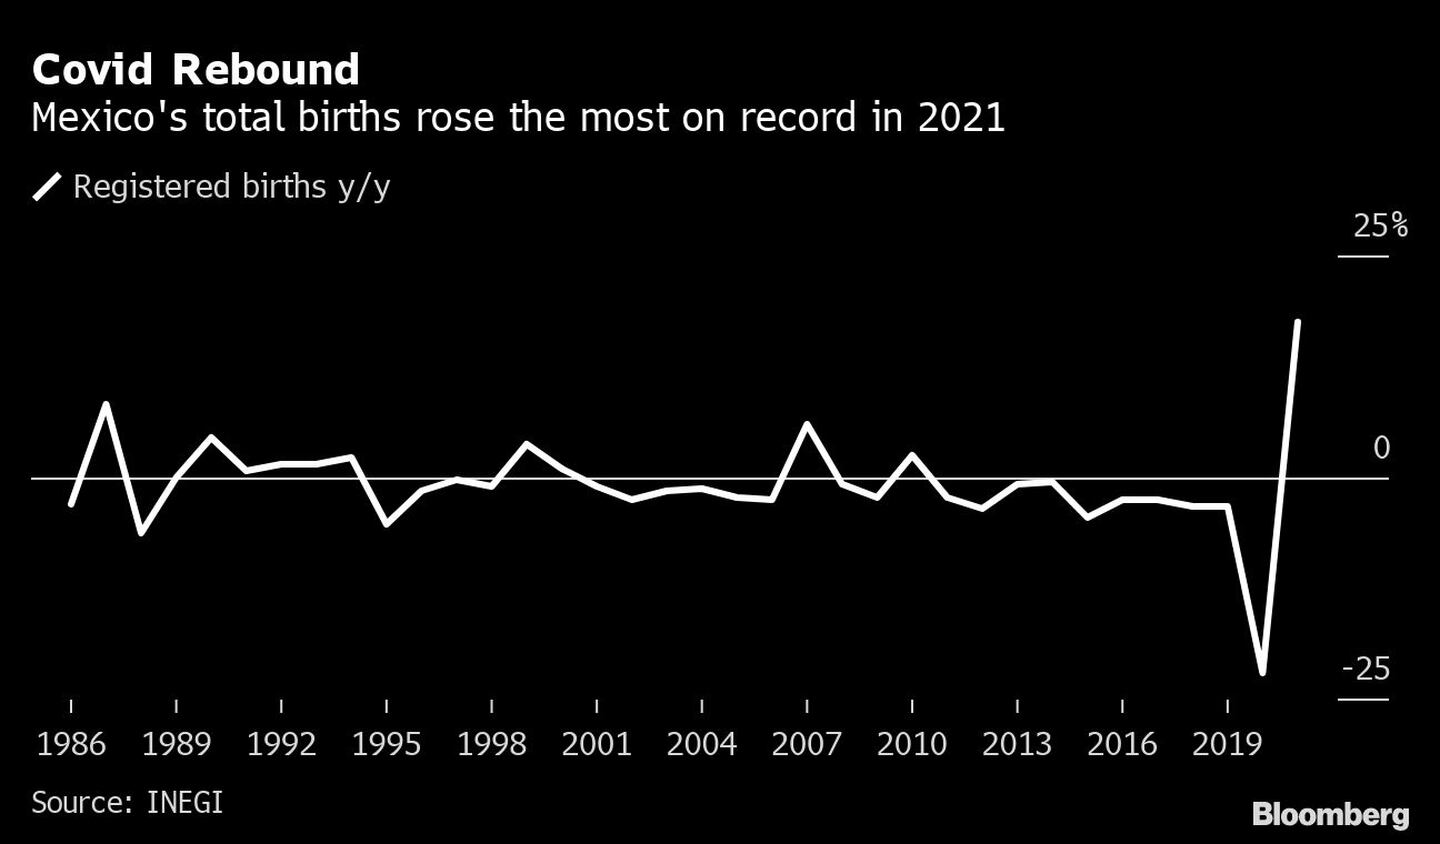 Covid Rebound | Mexico's total births rose the most on record in 2021dfd